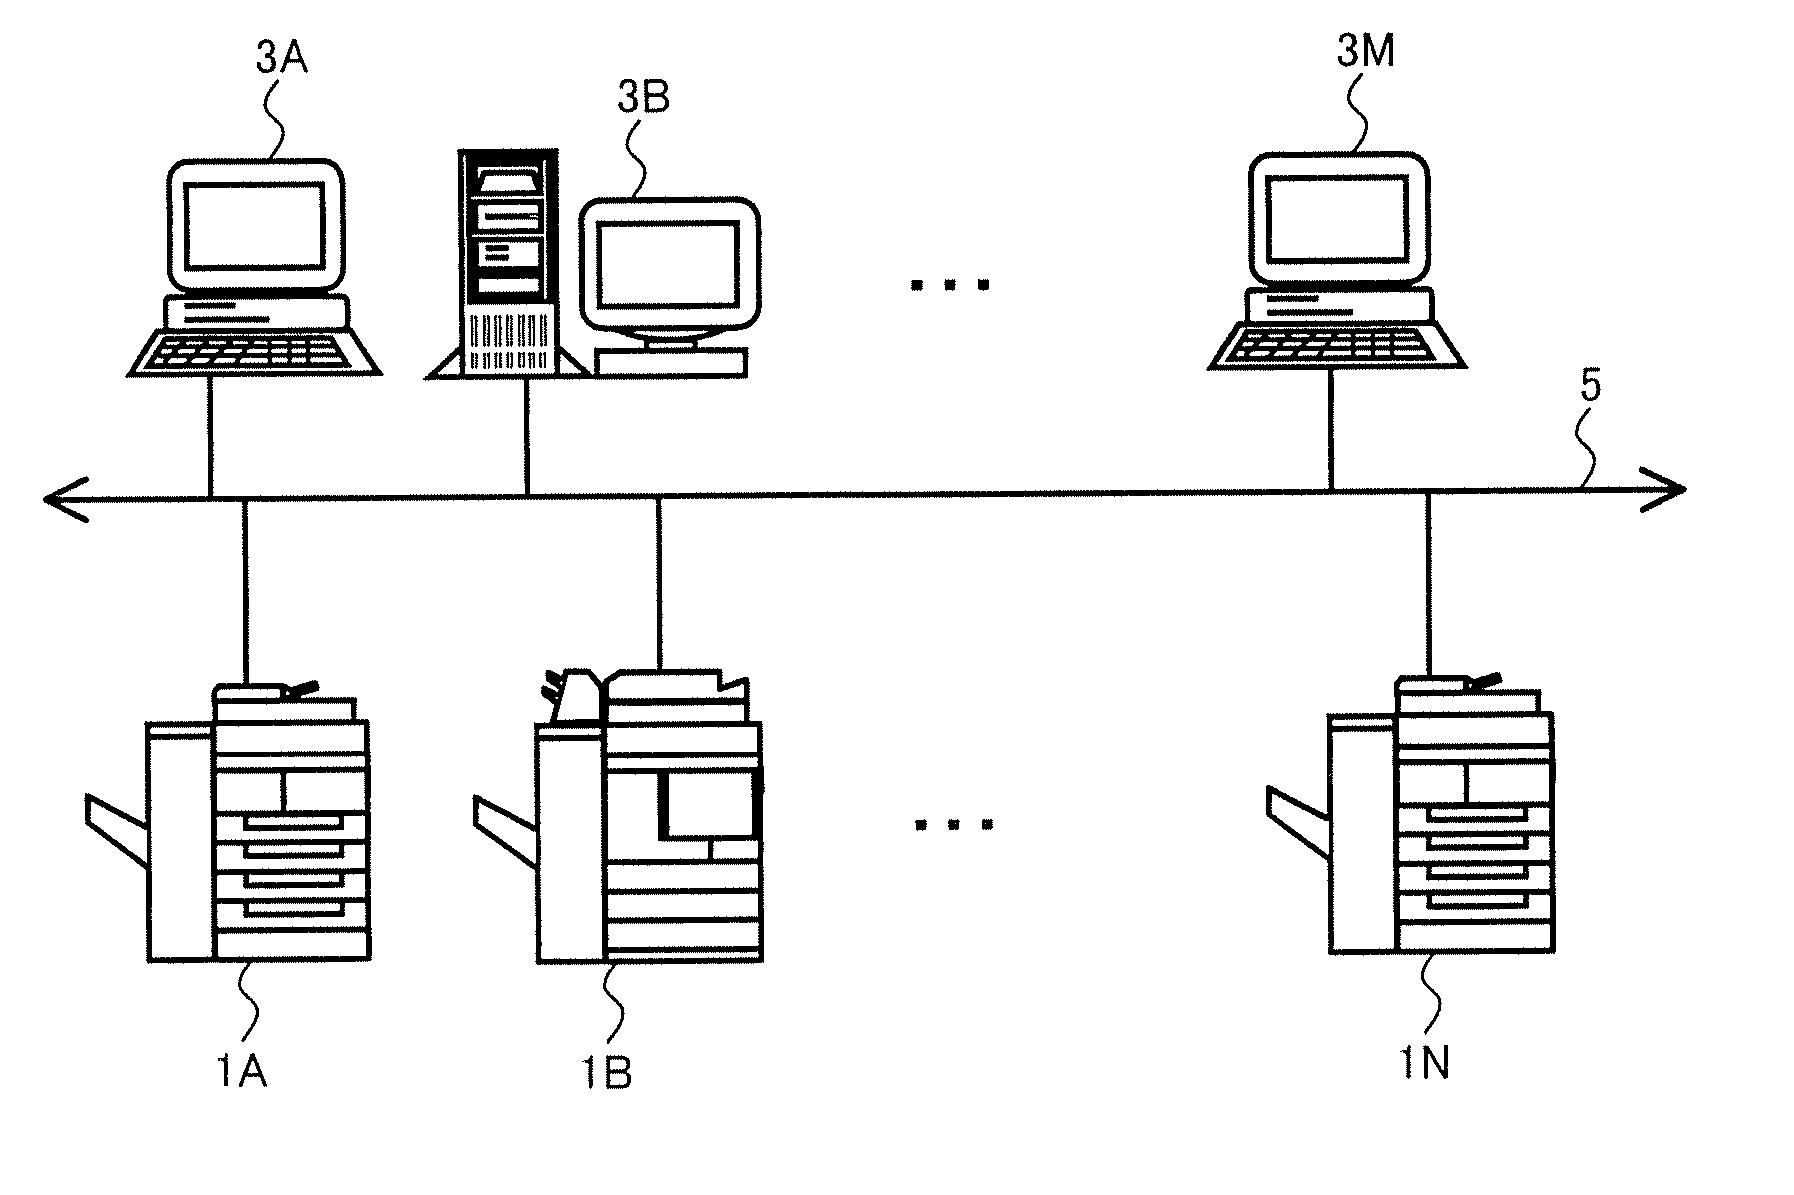 Image forming apparatus of efficiently storing information relating to client apparatuses in network environment